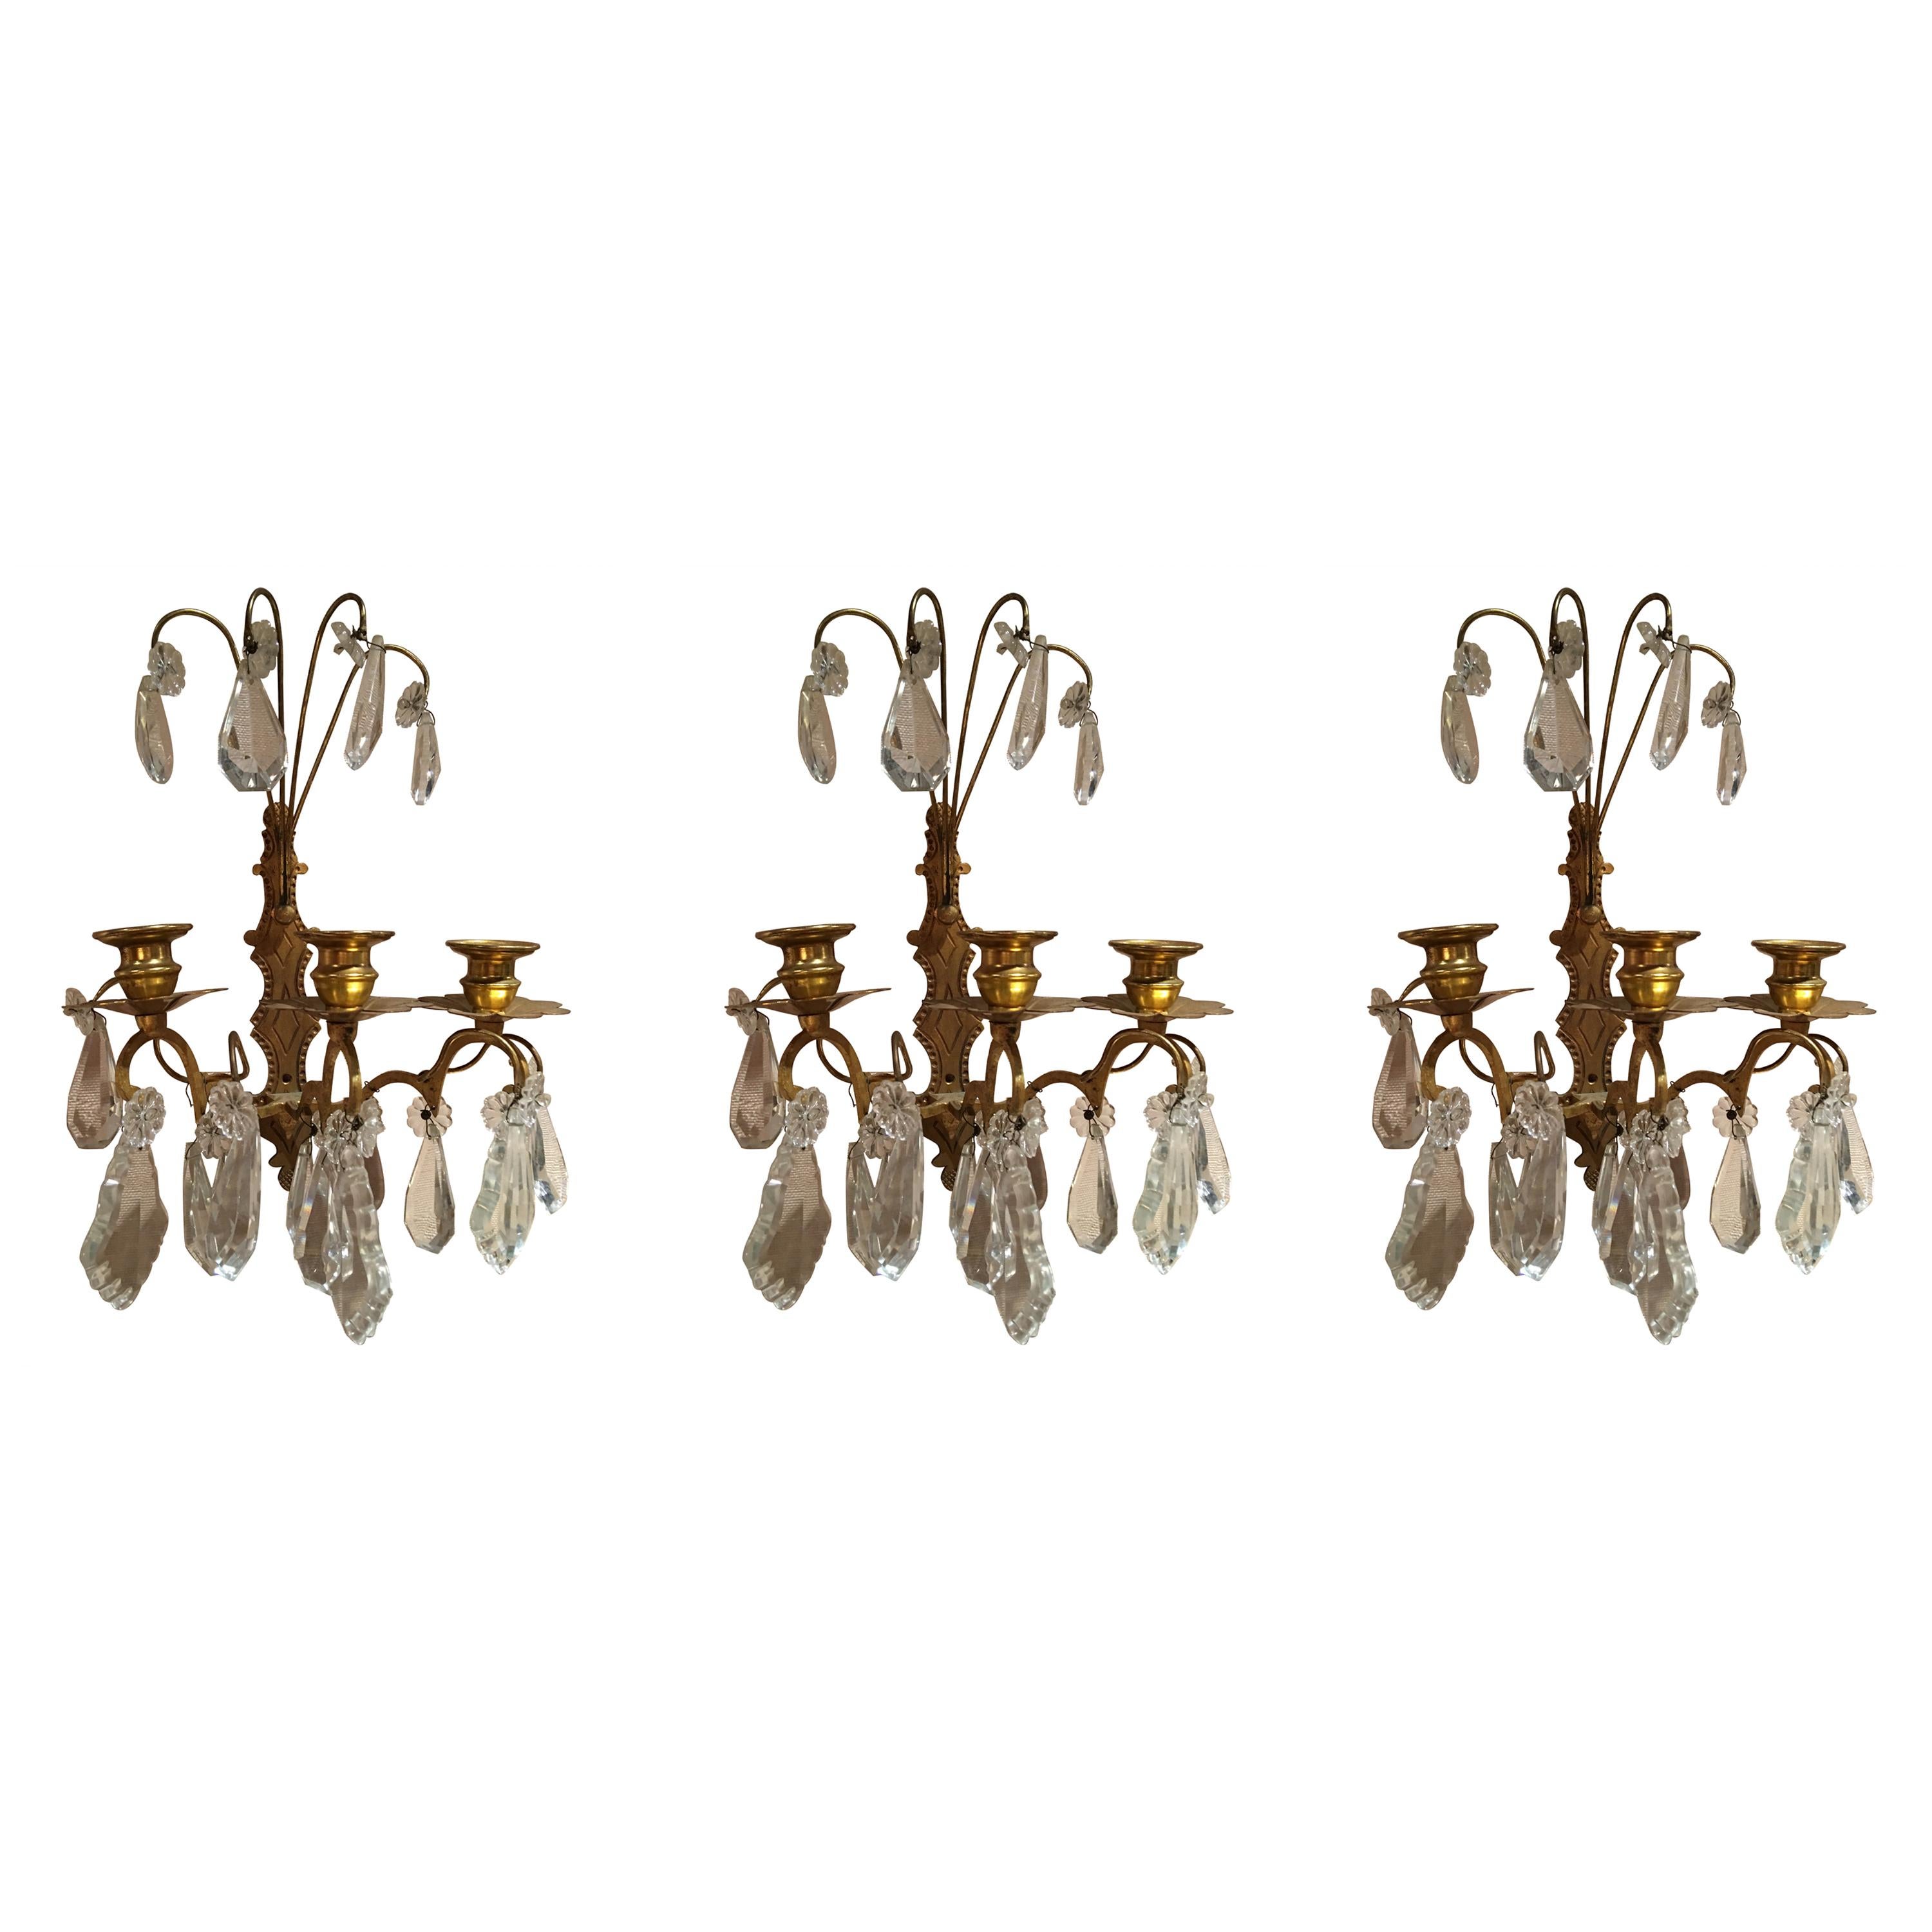 Set of Three French Gilt Metal and Crystal Sconces, 19th Century